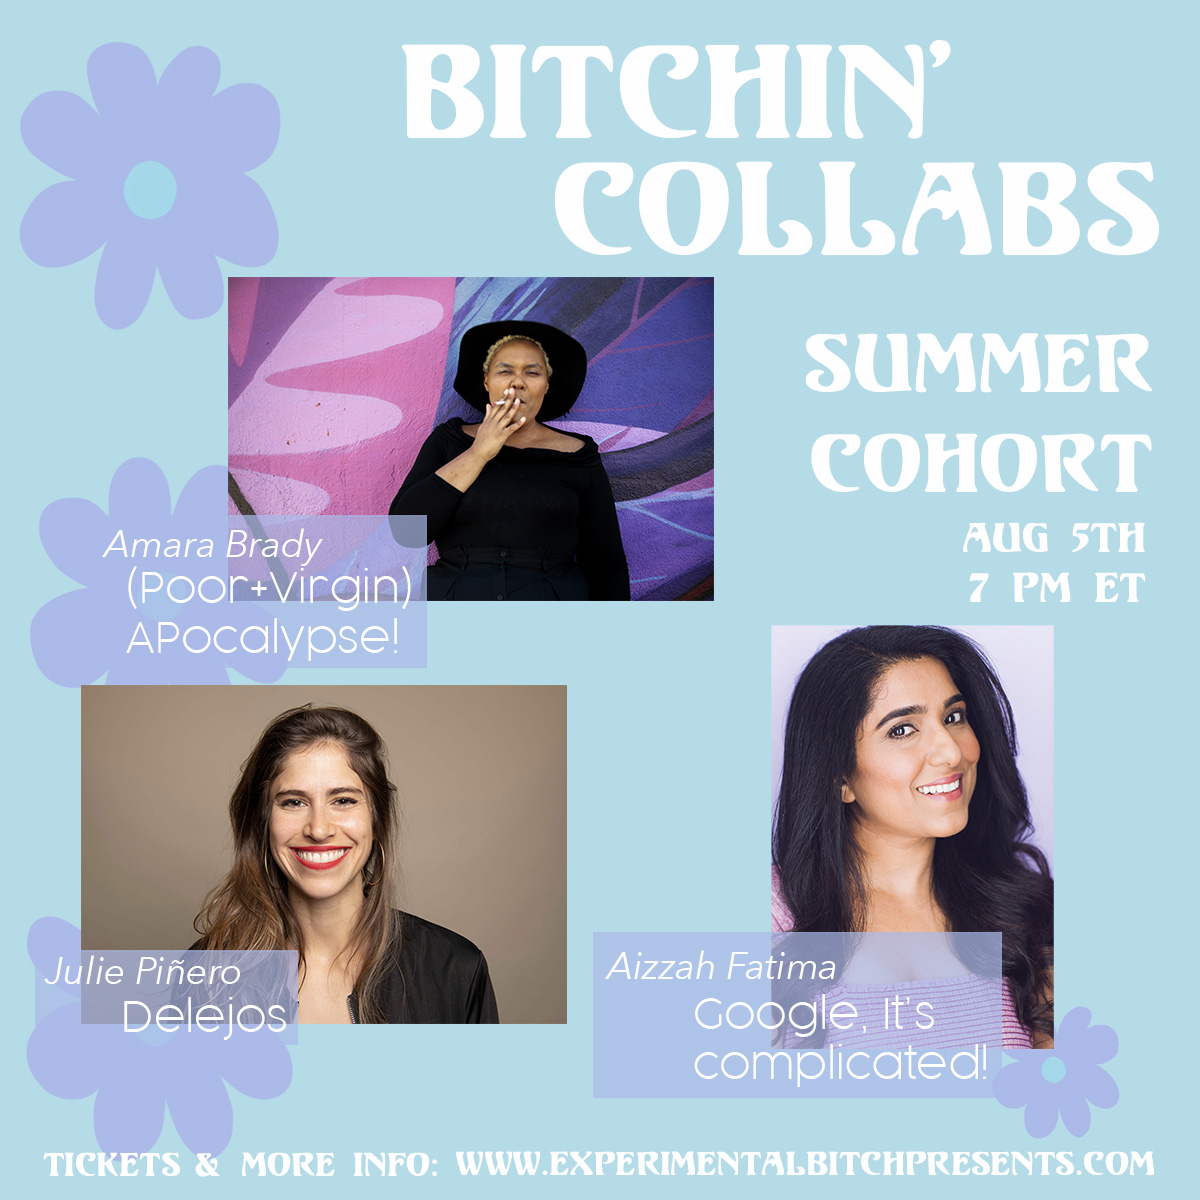 Experimental Bitch Hosts First Public Share Night For New Bitchin' Collabs Residency 